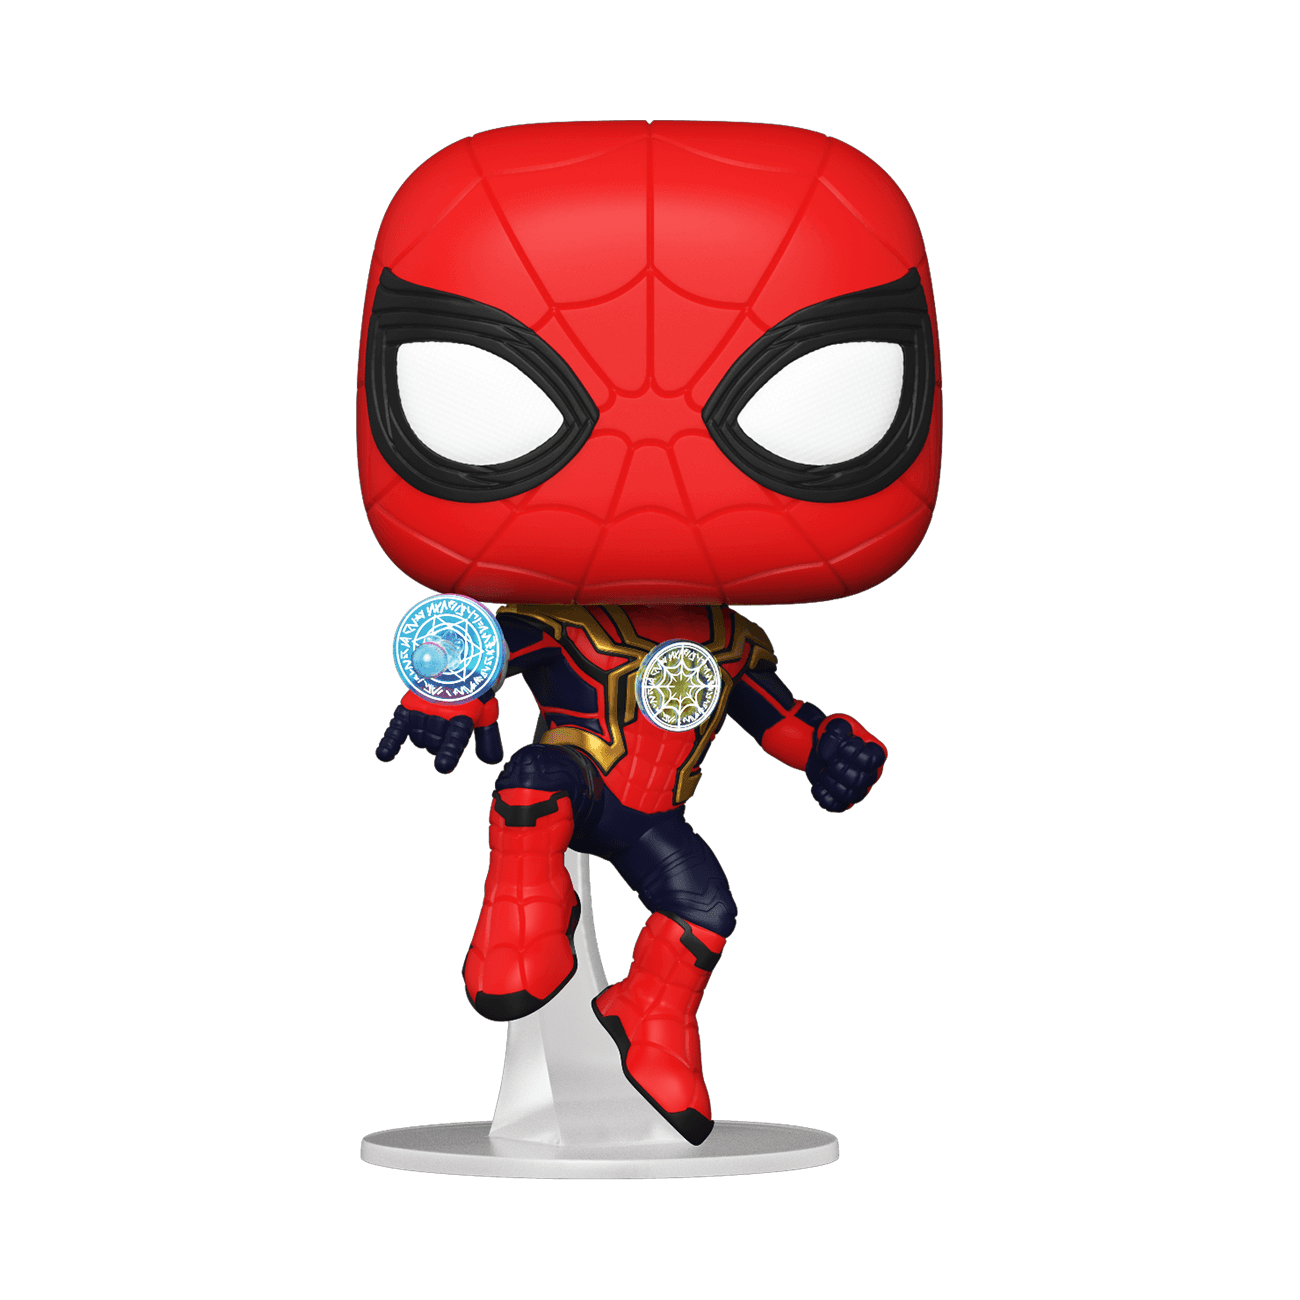 Marvel Spider-Man 3 No Way Home Dr Strange Action Mystery Web Gear